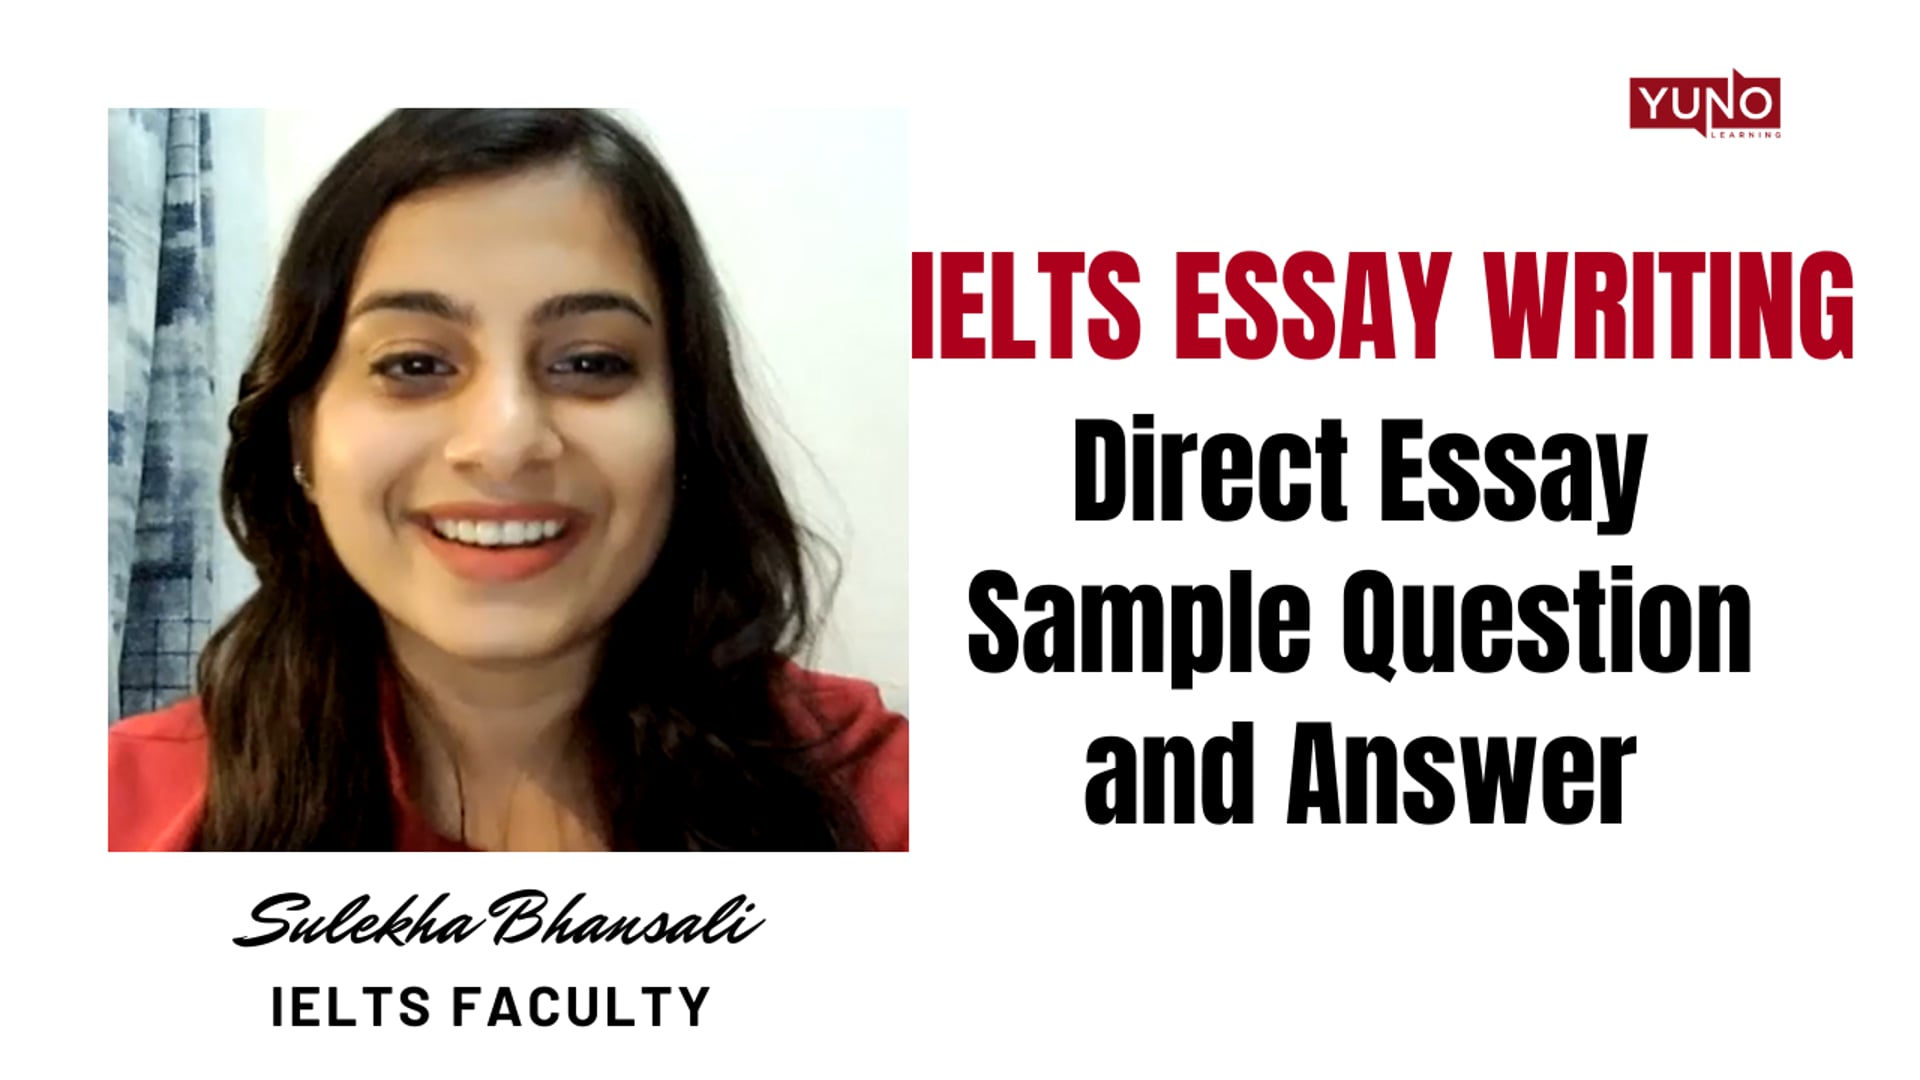 ielts-writing-task-2-sample-answer-yuno-learning